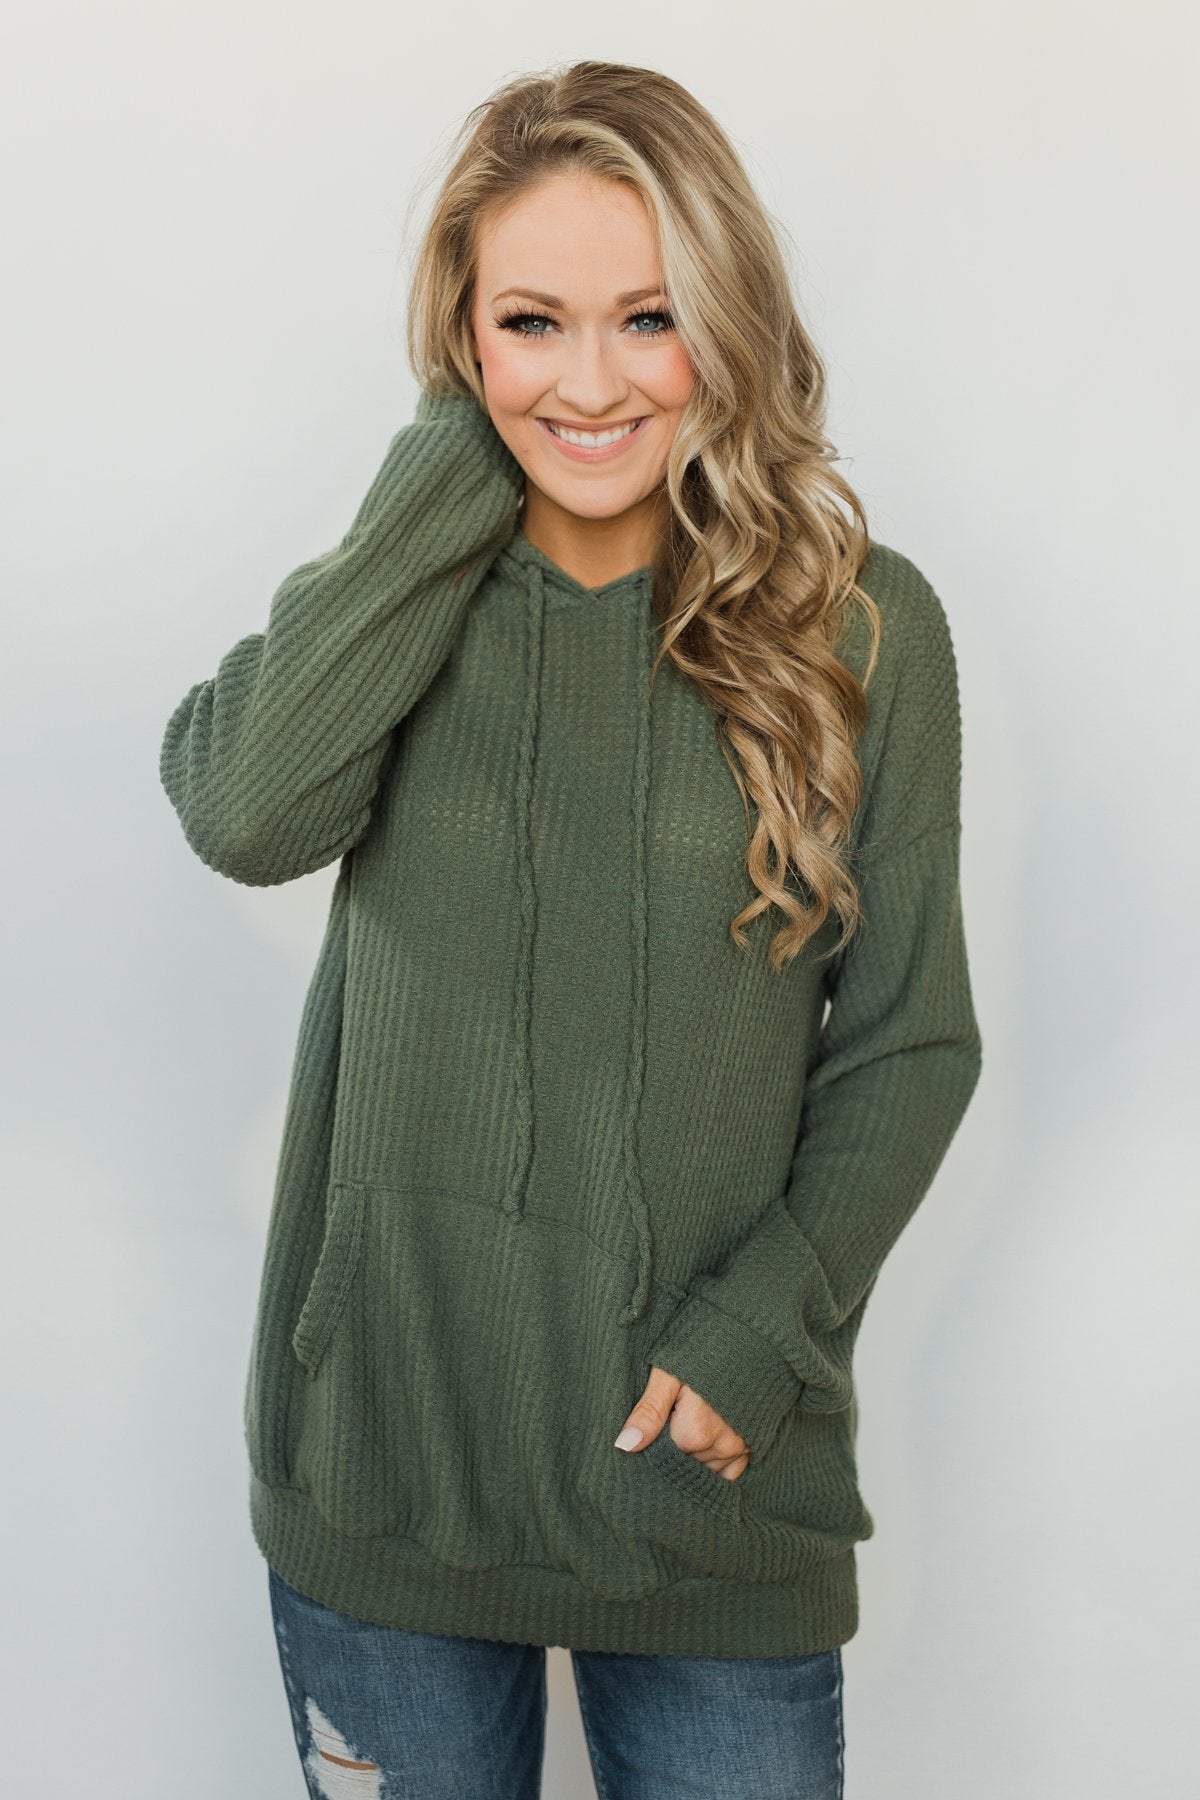 Home for Good Waffle Knit Hoodie - Olive